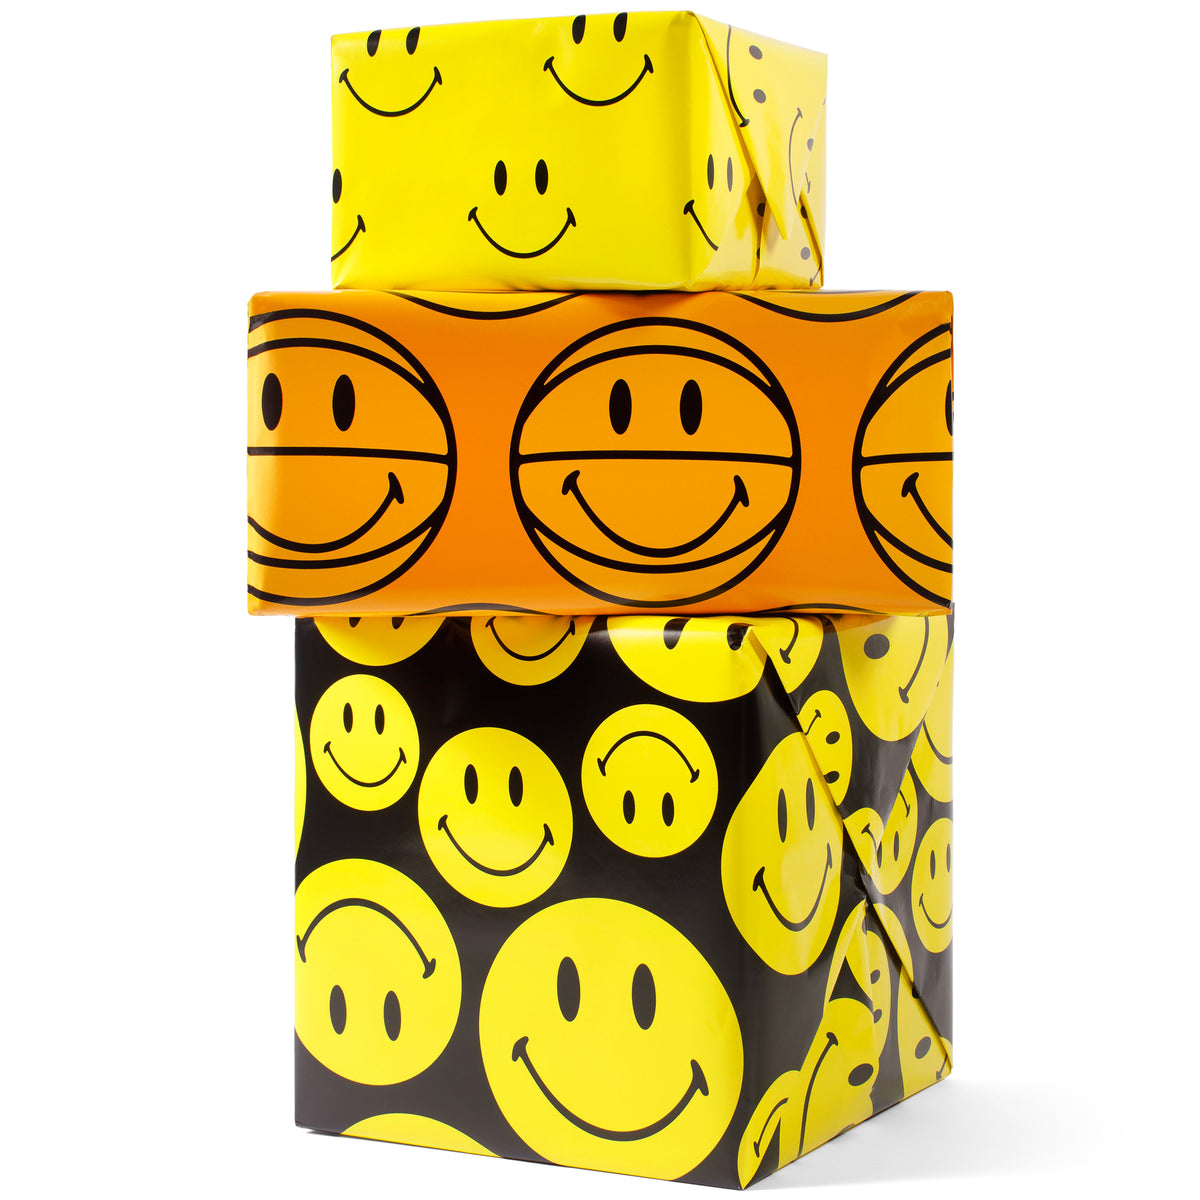 Market Smiley Gift Wrapping Paper "Multi"